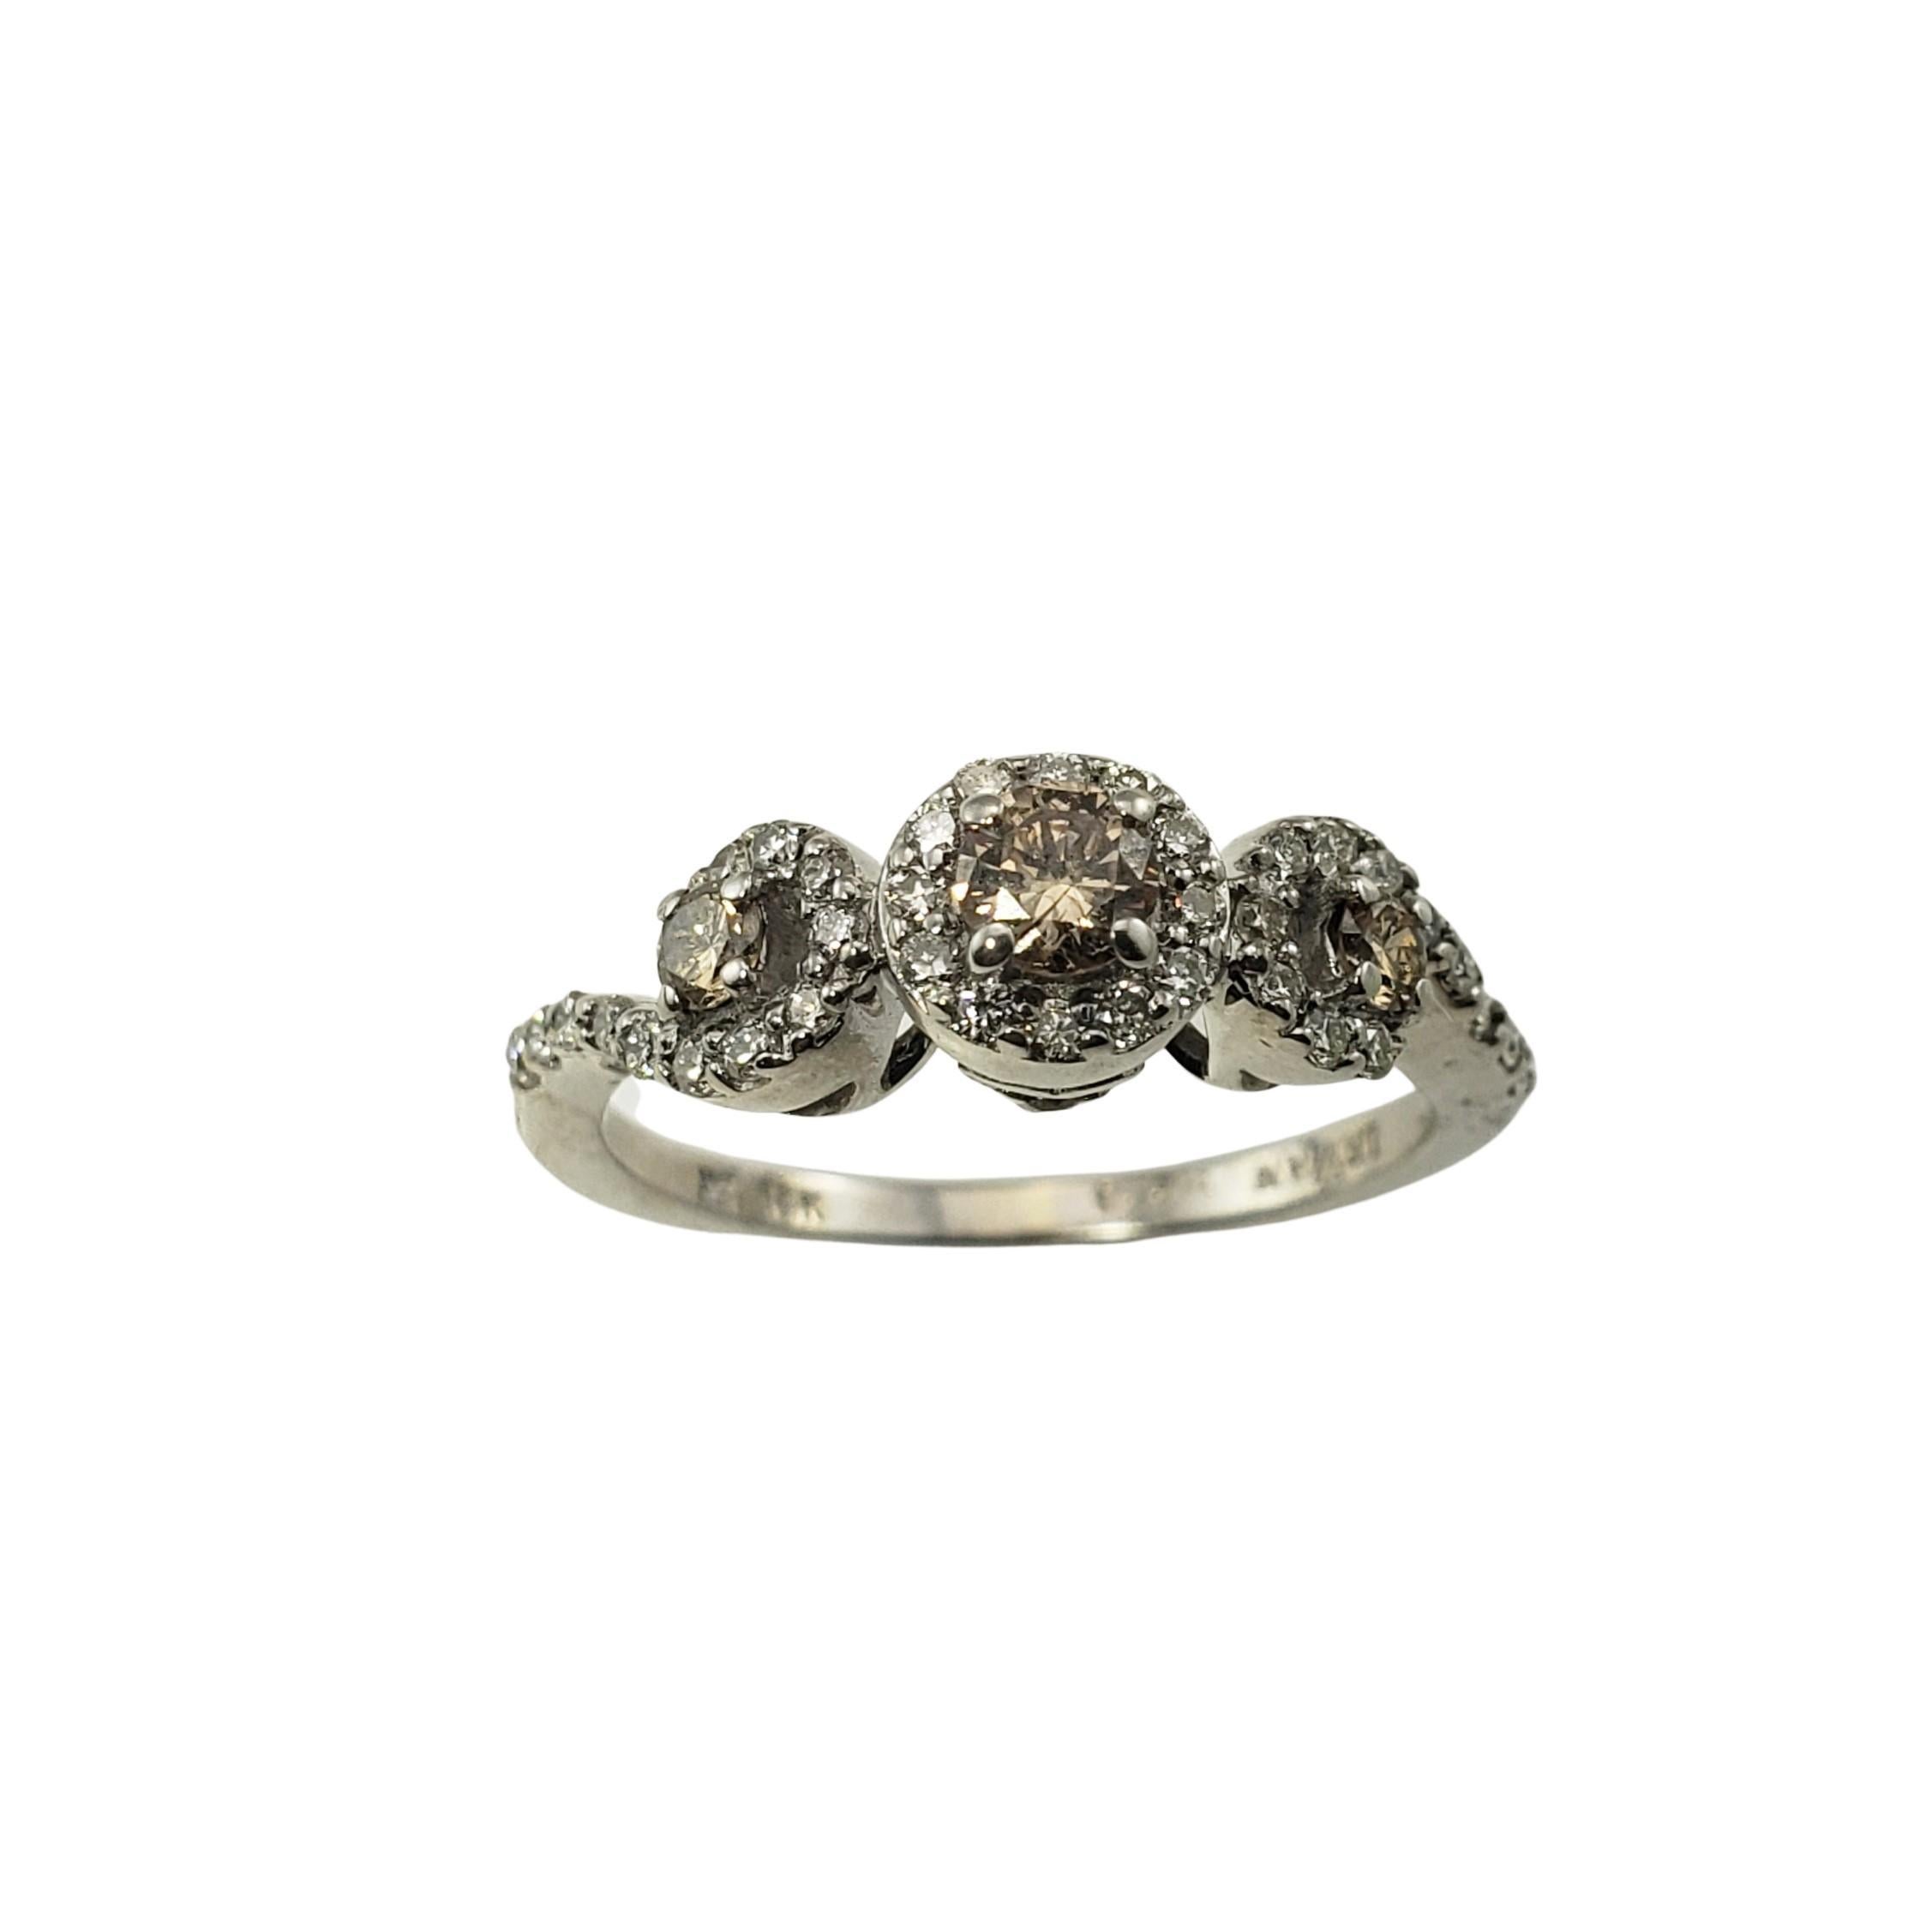 Vintage LeVain 14 Karat White Gold Champagne and White Diamond Ring Size 5.5-

This sparkling ring features five round brilliant cut champagne diamonds (.23 total carat weight) and 26 round brilliant cut white diamonds (.36 total carat weight) set